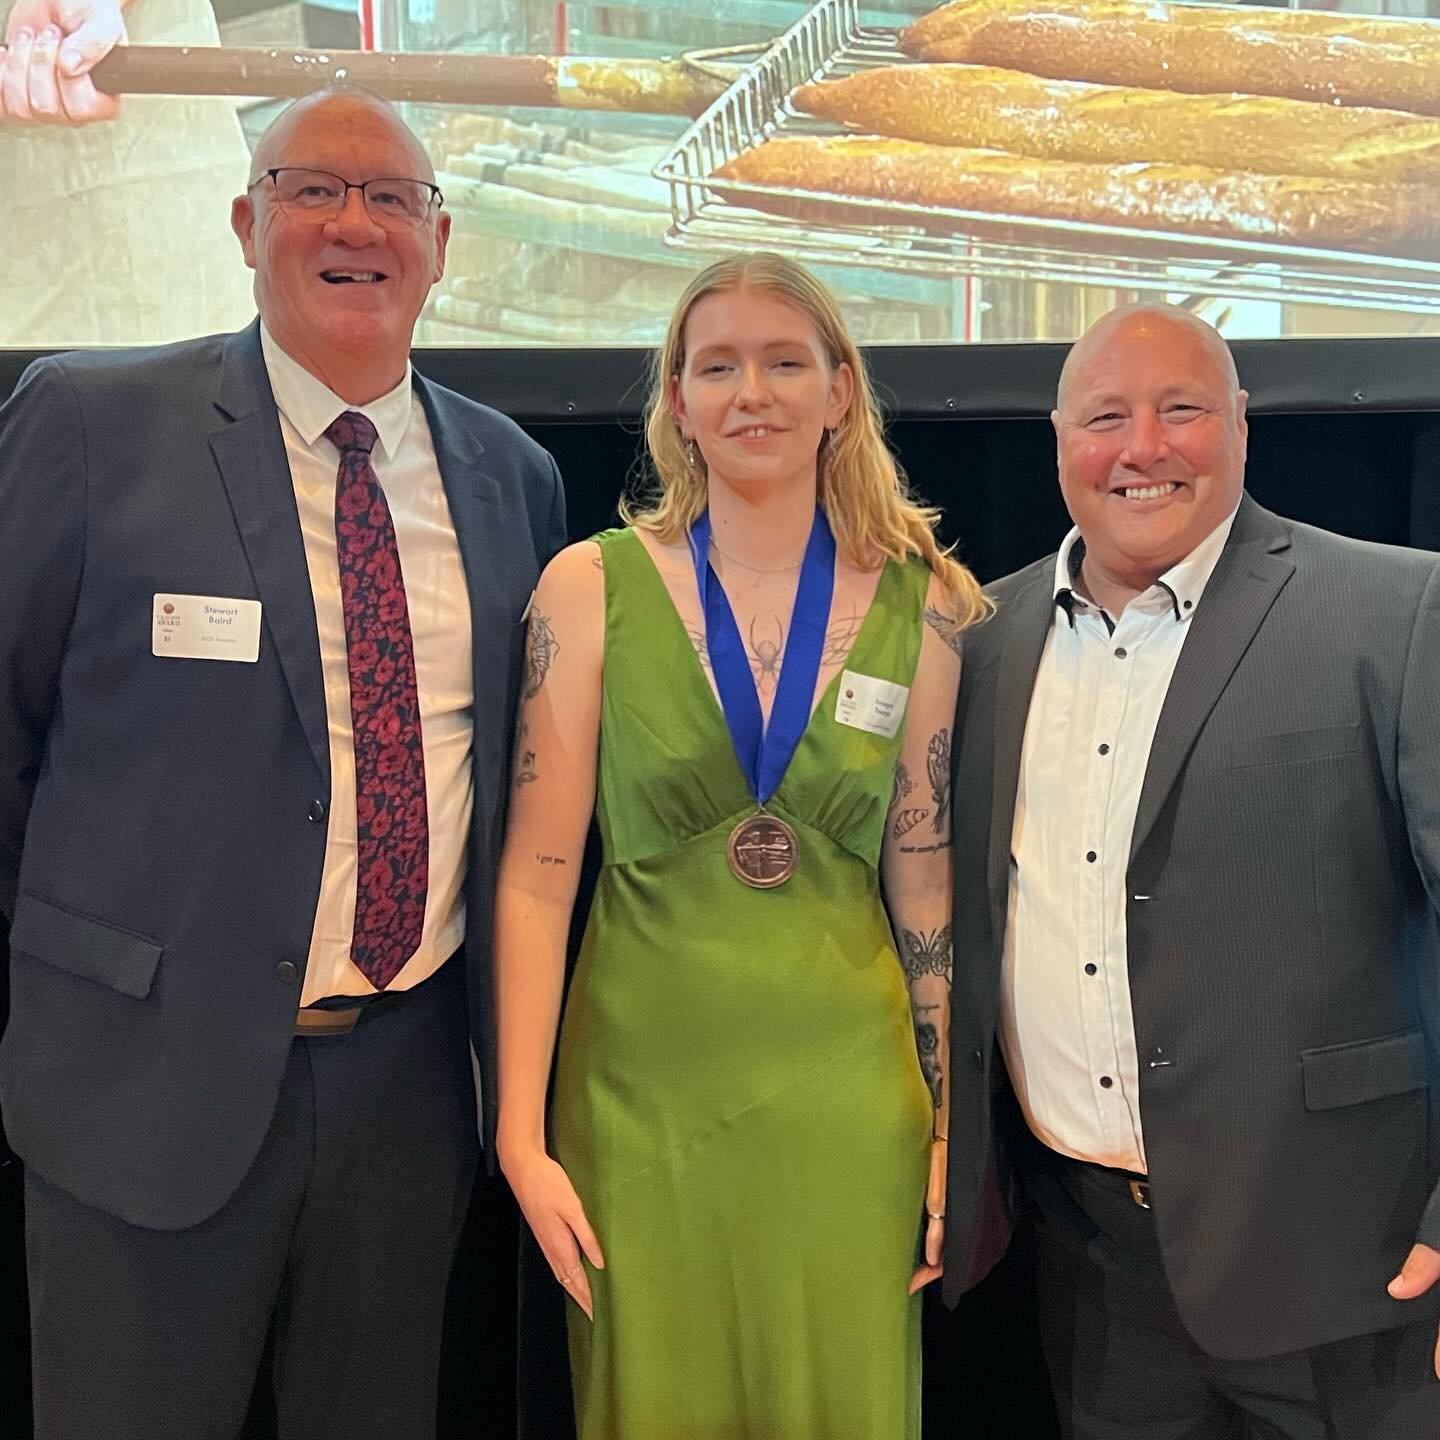 A huge congratulations goes to Imogen for taking out the most prestigious baking award @lajudgeaward last night 👏🏻👏🏻👏🏻. Stewart and Andrew from the MOI team representing and looking dapper! 

#moi #moiinternational #moiaustralia #bakeryfats #ba